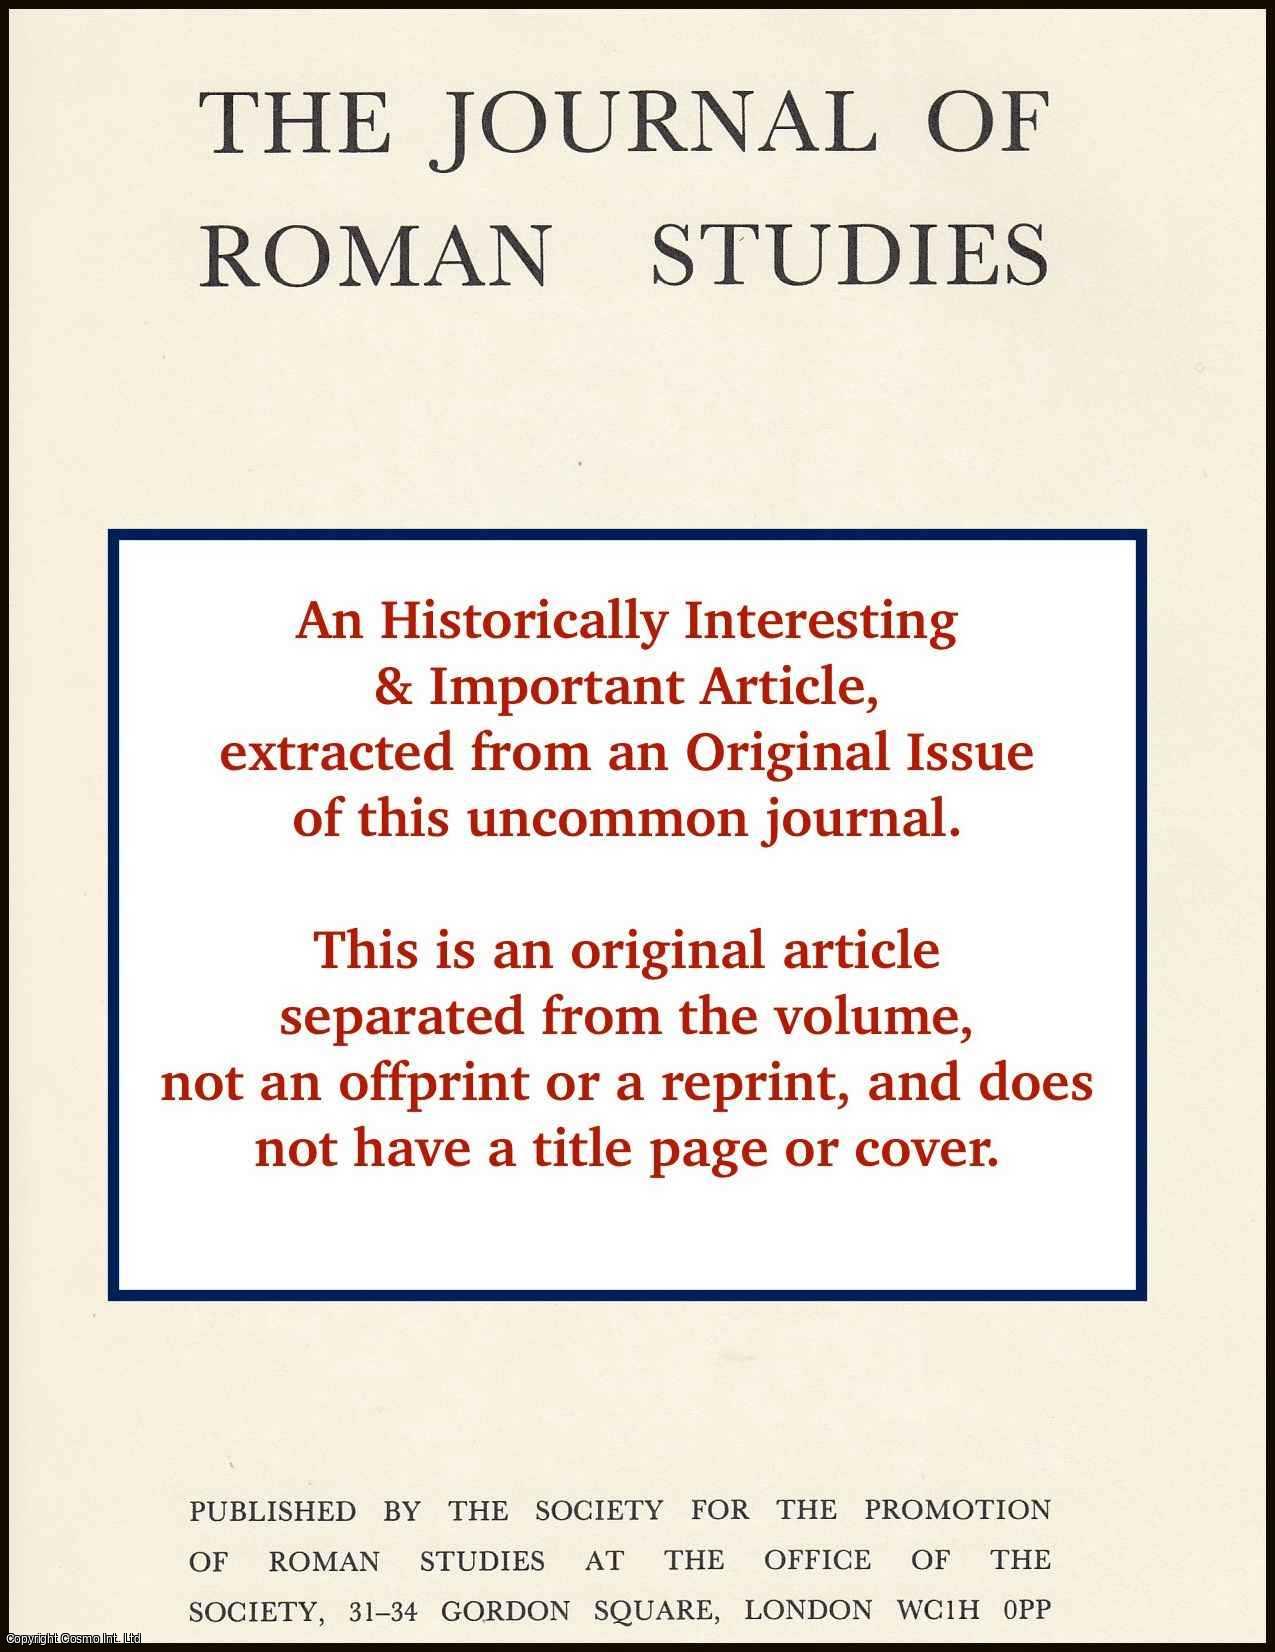 R.G. Goodchild and J.B. Ward-Perkins - The Limes Tripolitanvs, Part 1, in the Light of Recent Discoveries. An original article from the Journal of Roman Studies, 1949.